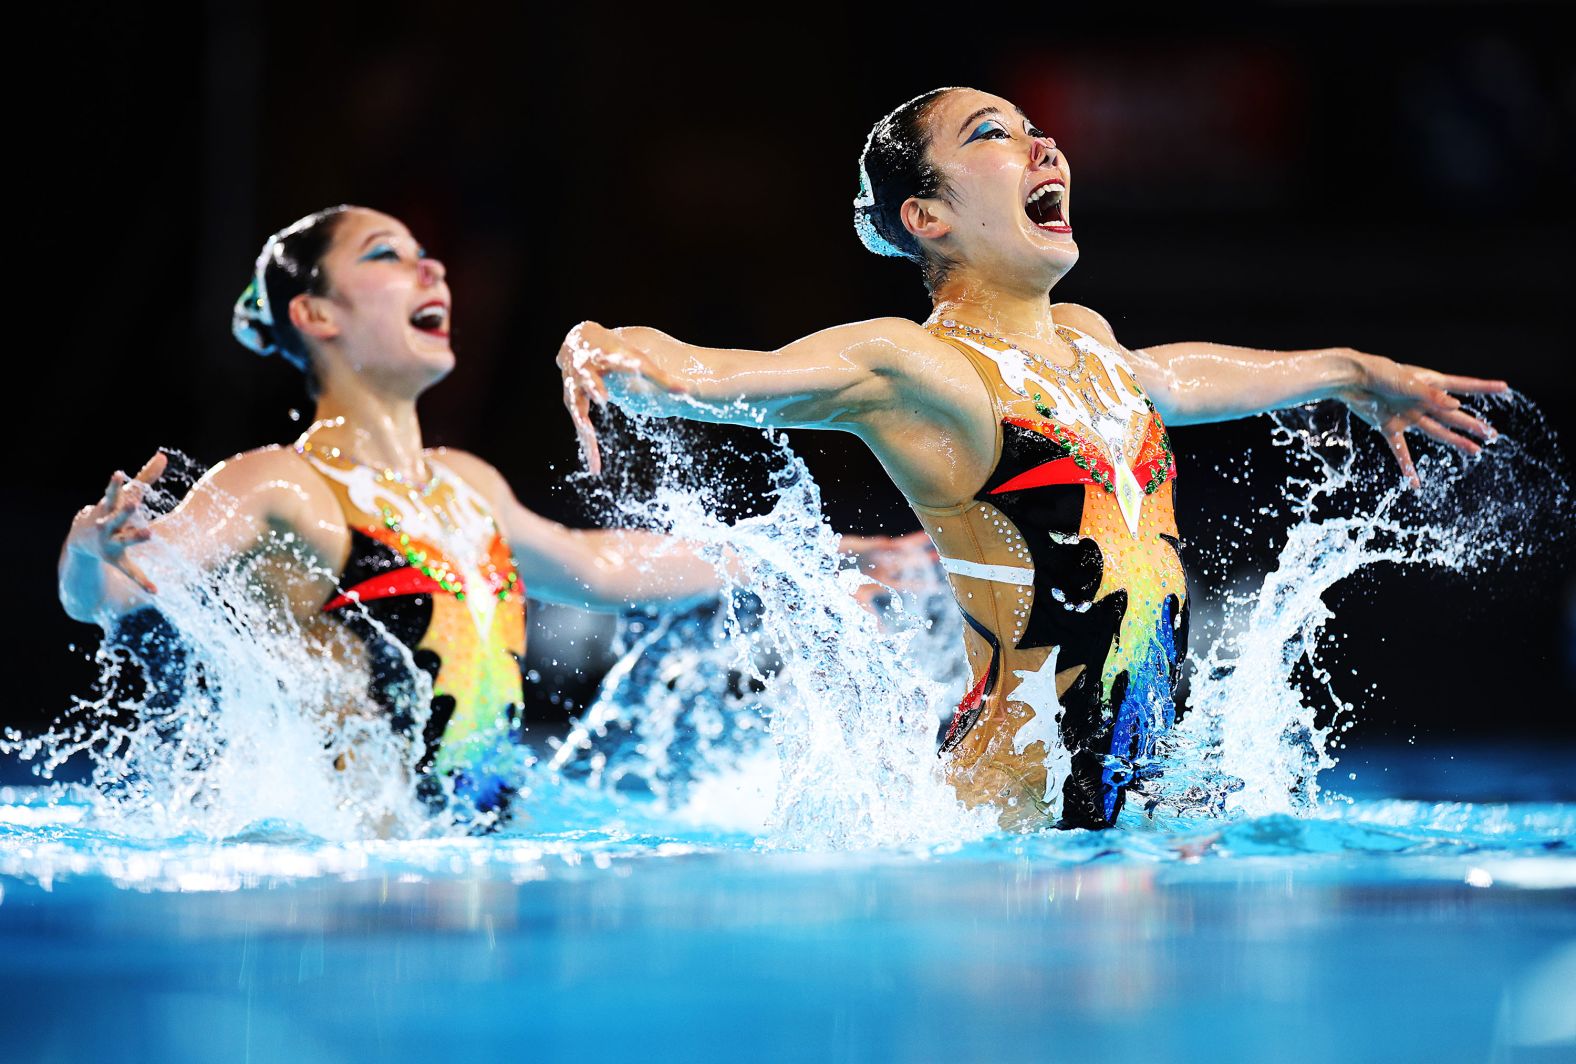 Moe Higa and Mashiro Yasunaga, artistic swimmers from Japan, perform a duet routine during a World Cup event in Paris on Friday, May 3. They won the silver.